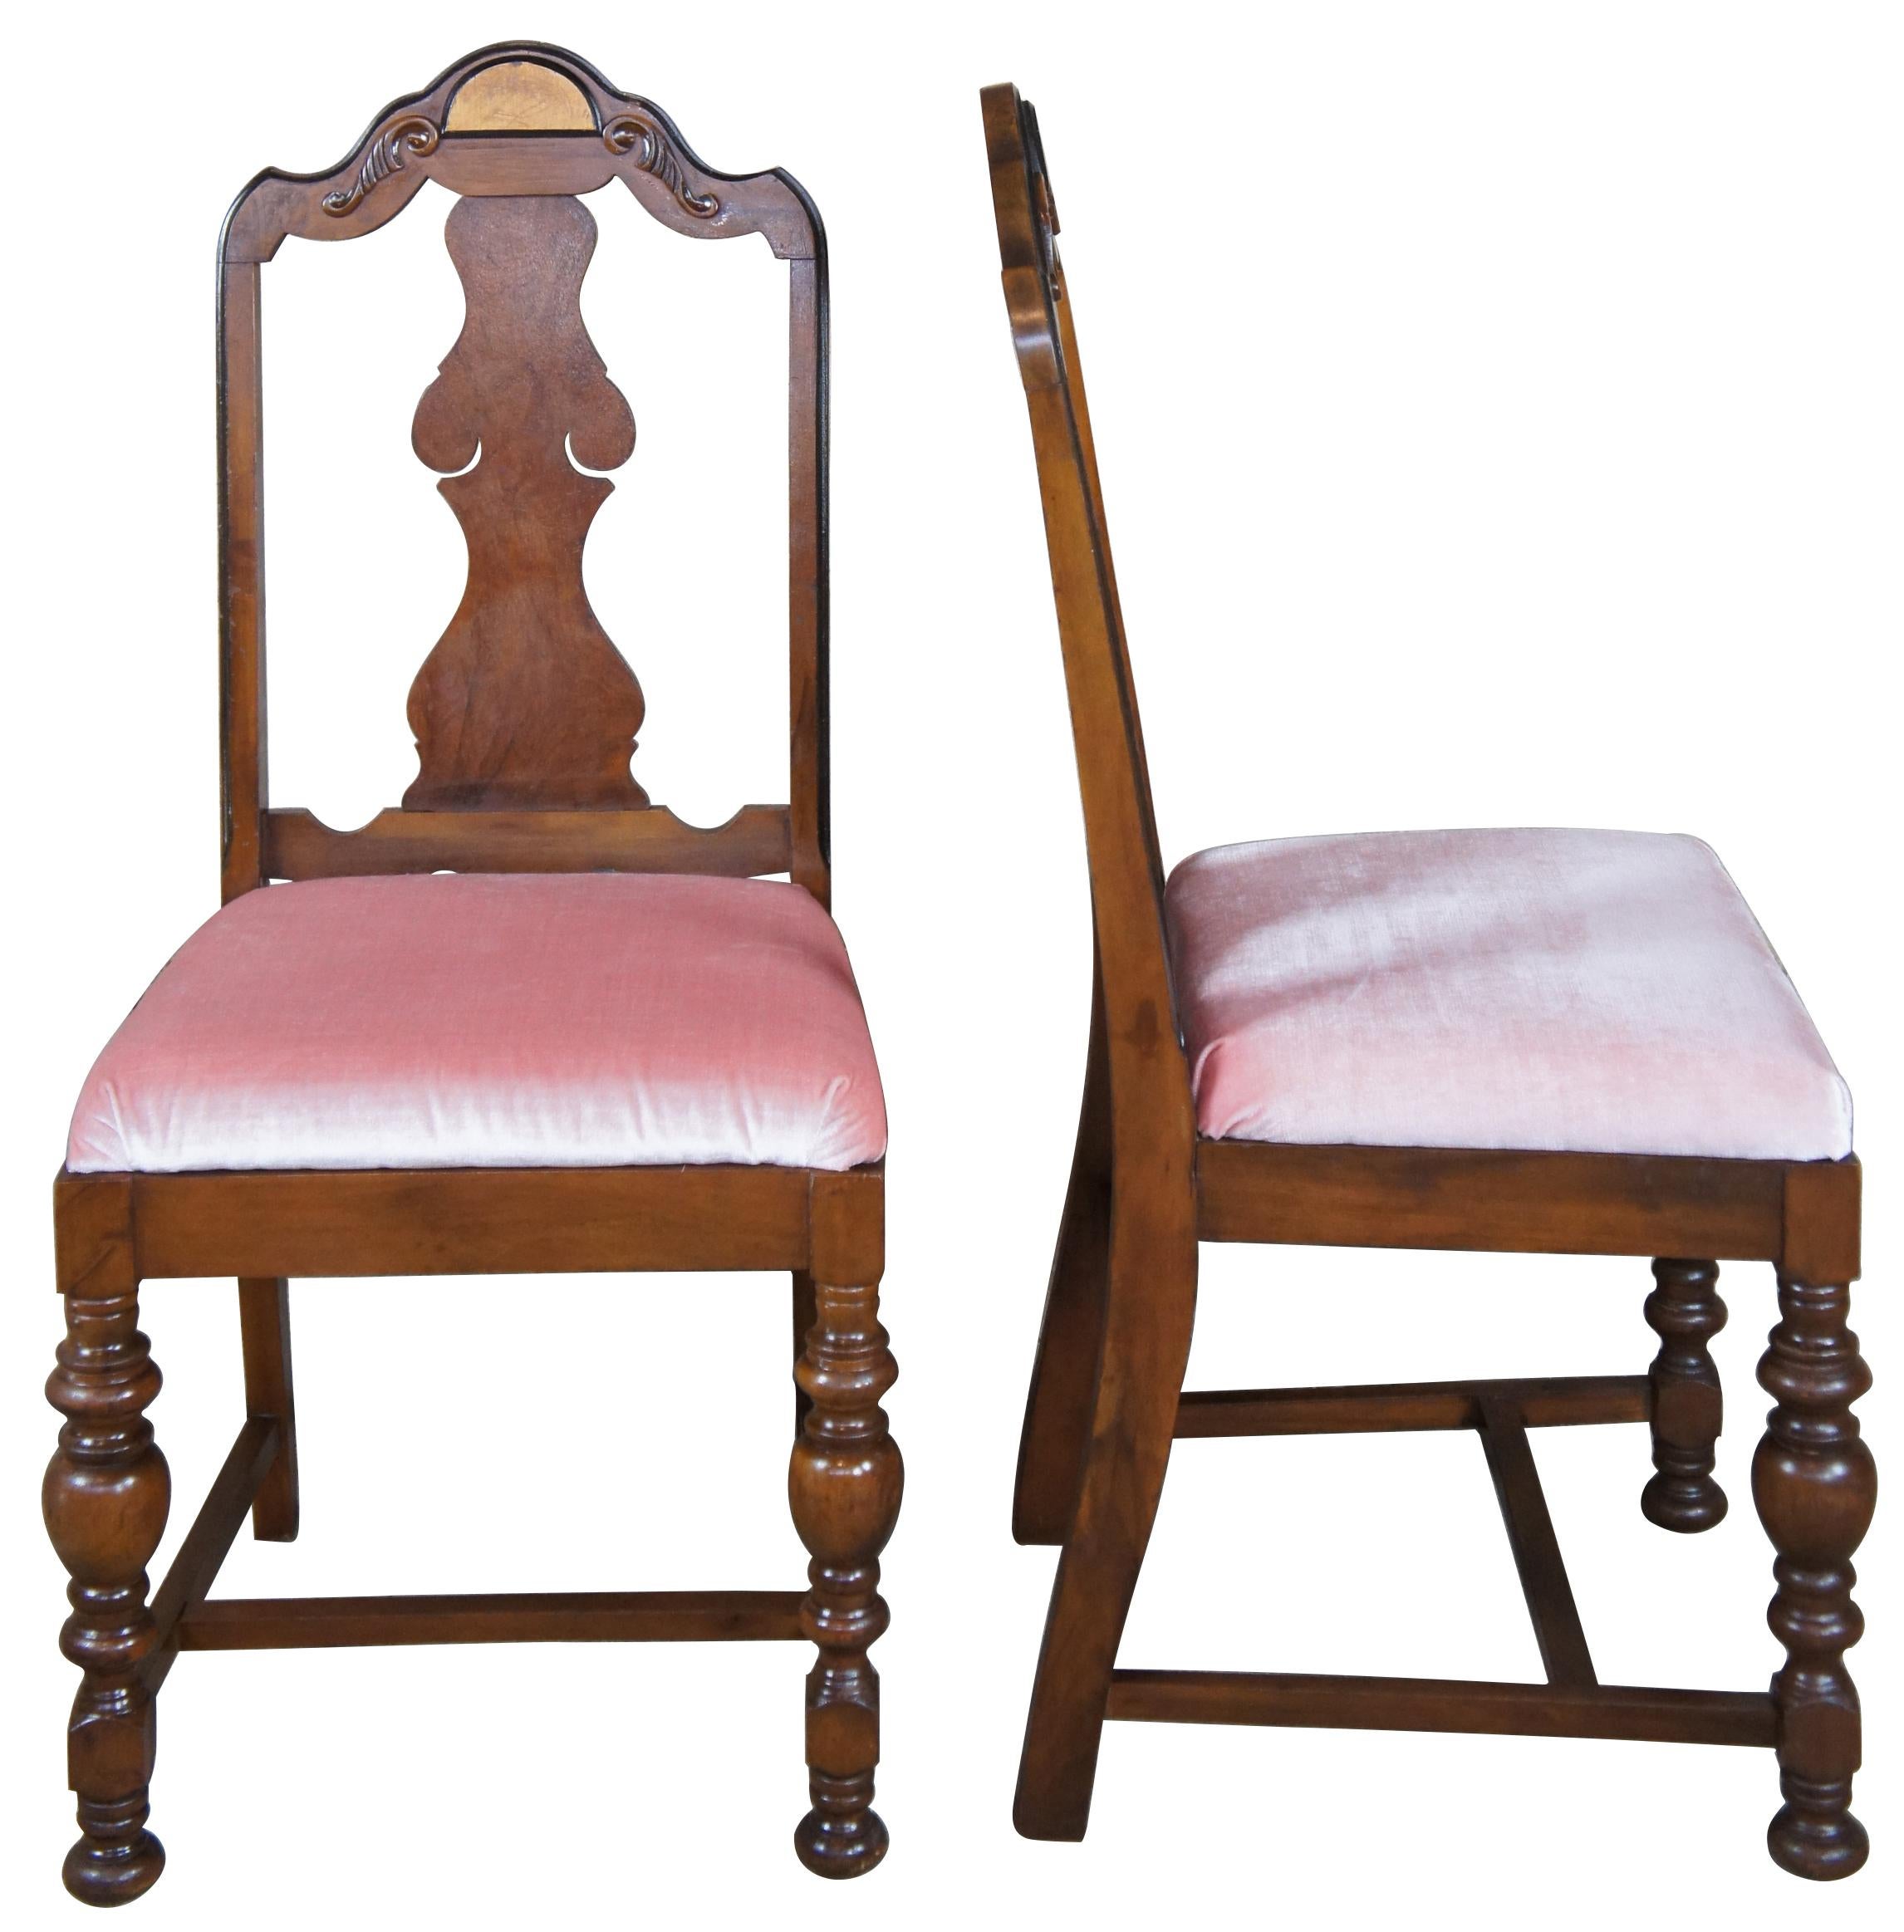 Early 20th century Jacobean style dining chairs. Made from walnut with an accent along crown. Features vase shaped splat, ab arhed crown with scrolled accents and turned baluster supports connected by an H-stretcher.
  